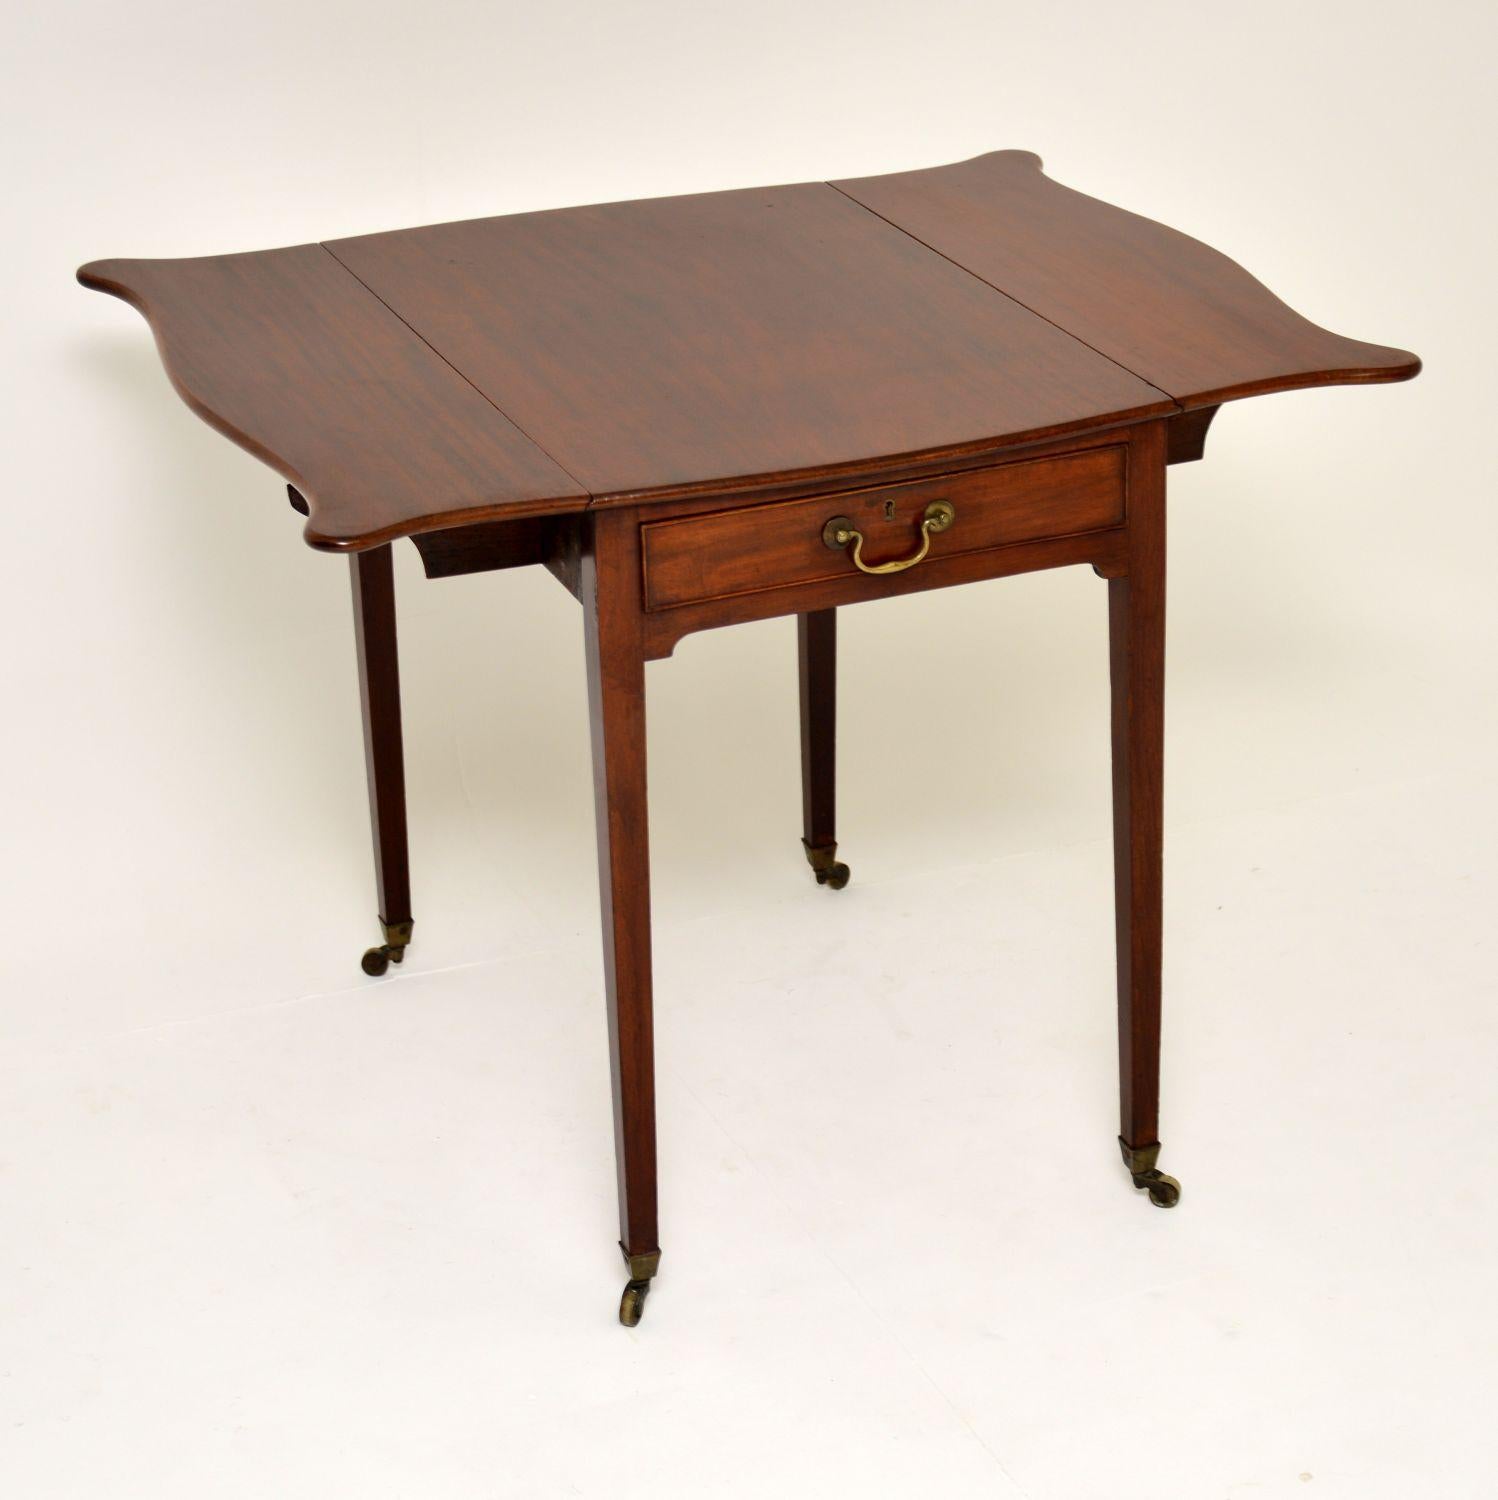 Antique George III solid mahogany Pembroke table in excellent original condition & dating to circa 1790 period.

This is a very elegant table, free from splits & warps. The drop leaves have well shaped butterfly ends & the tapered legs have brass